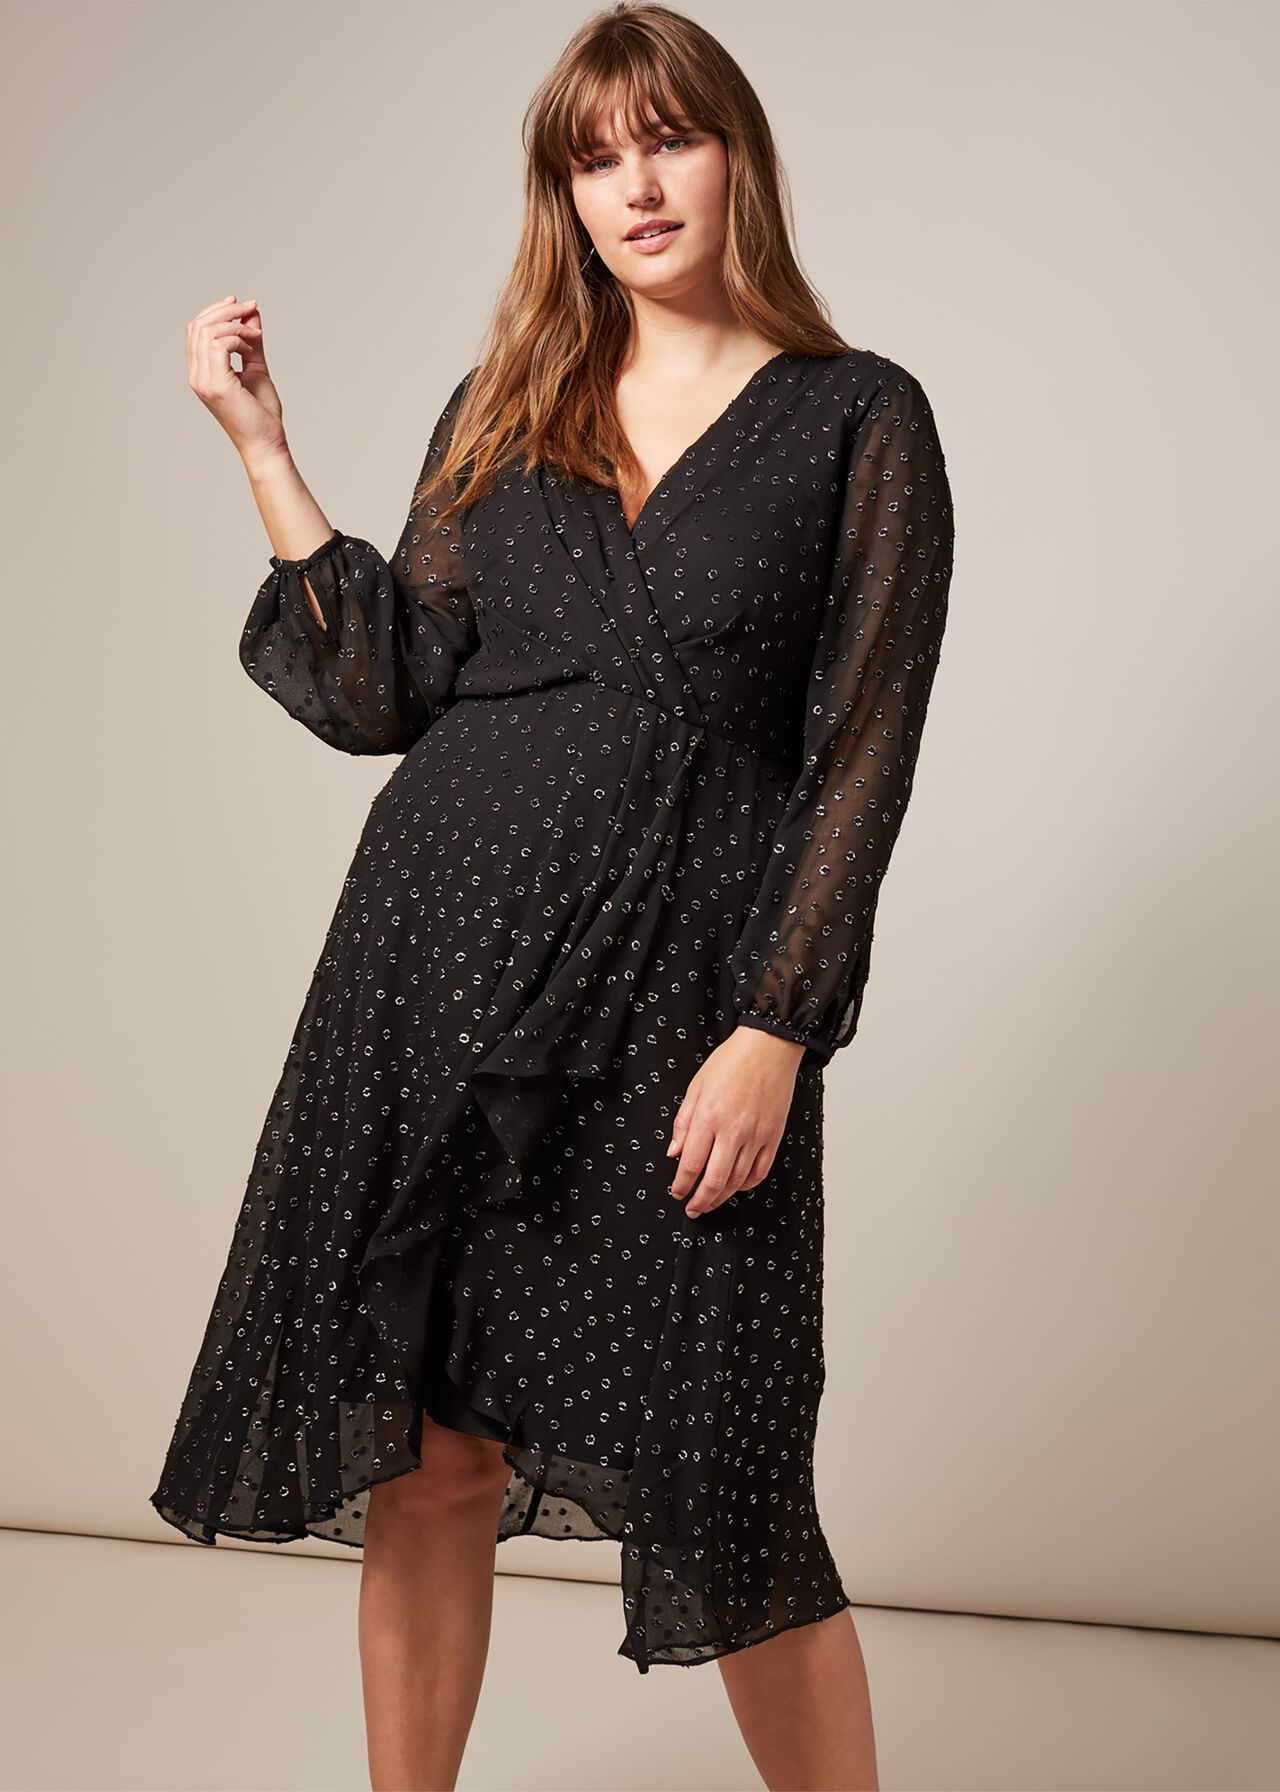 Elodie Spot Dress | Phase Eight